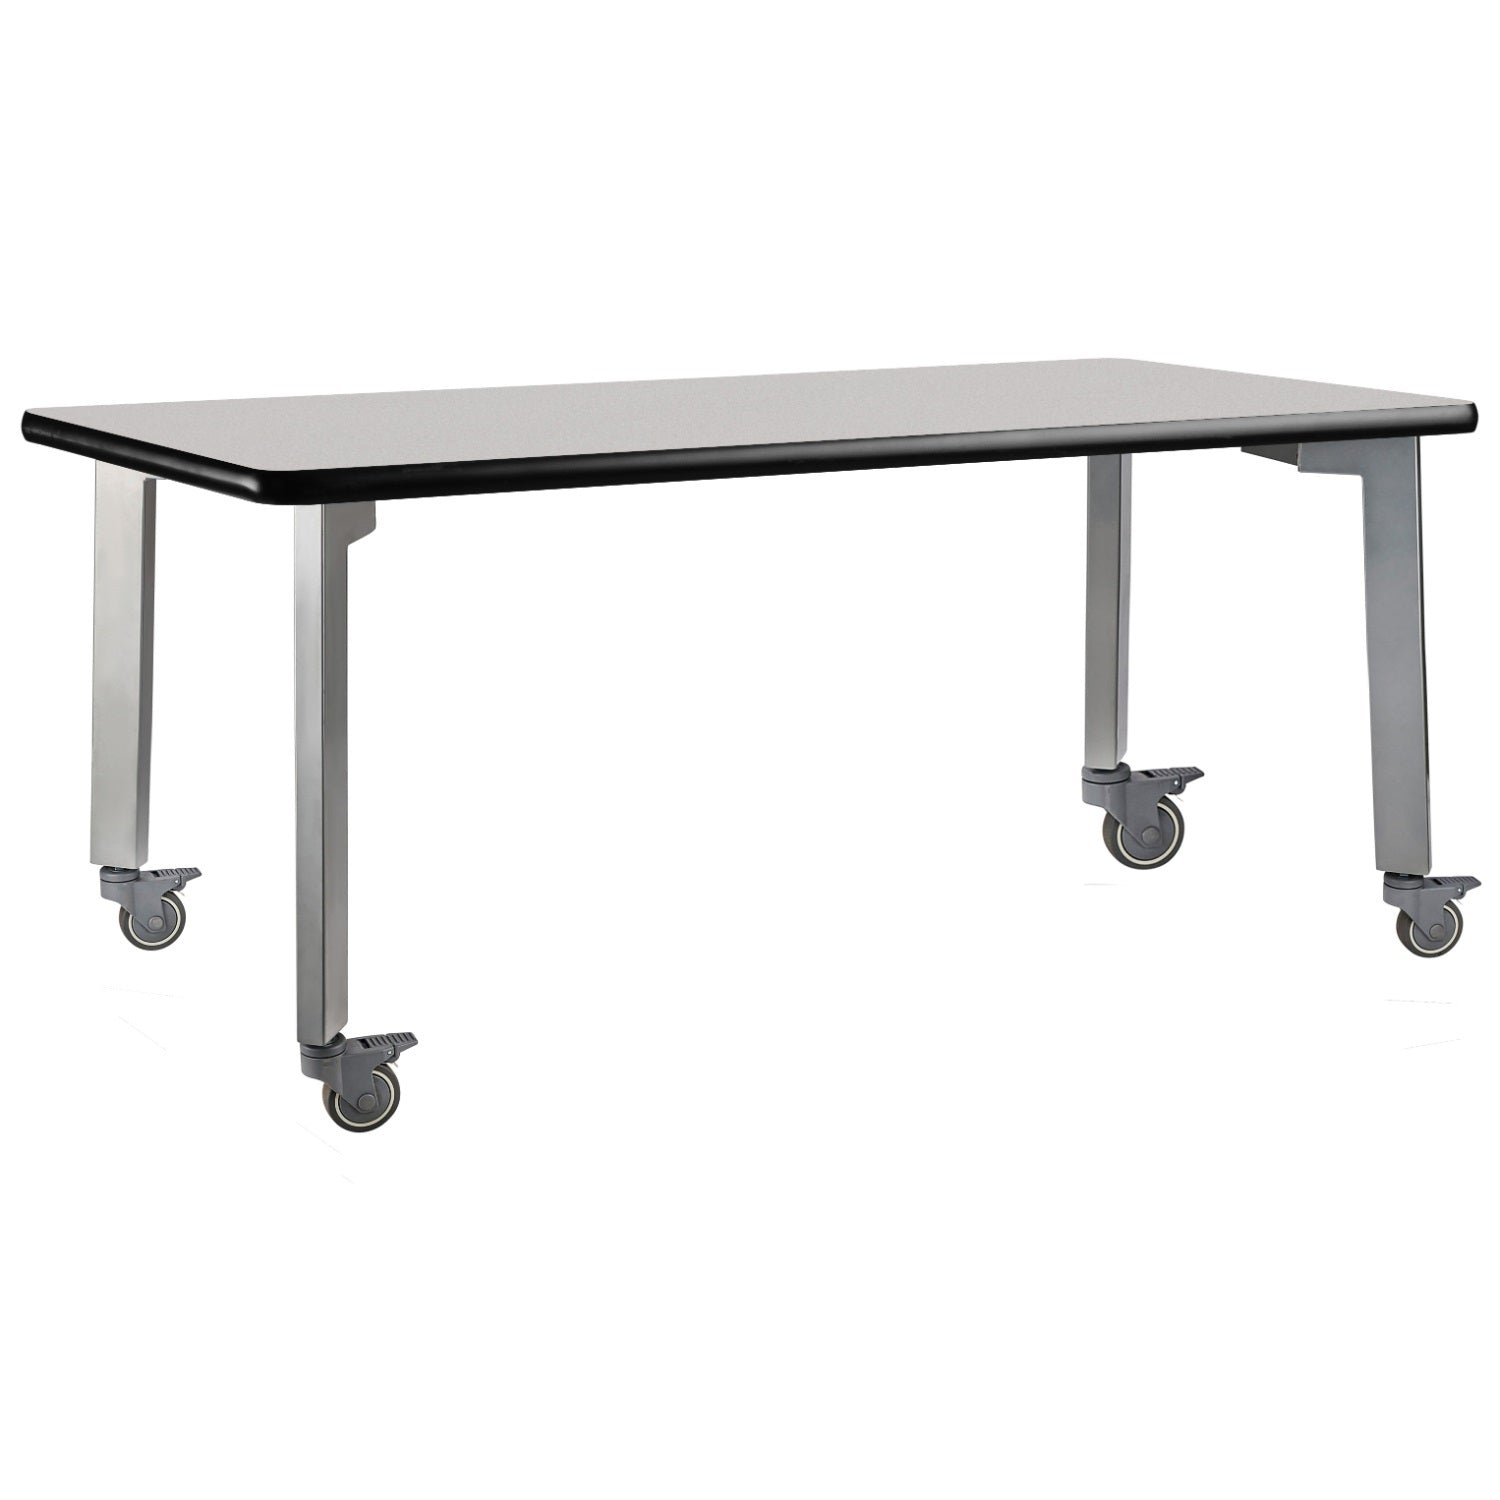 Titan Mobile Table, 42" x 84", Standard High Pressure Laminate Top with Particleboard Core and T-Mold Edge